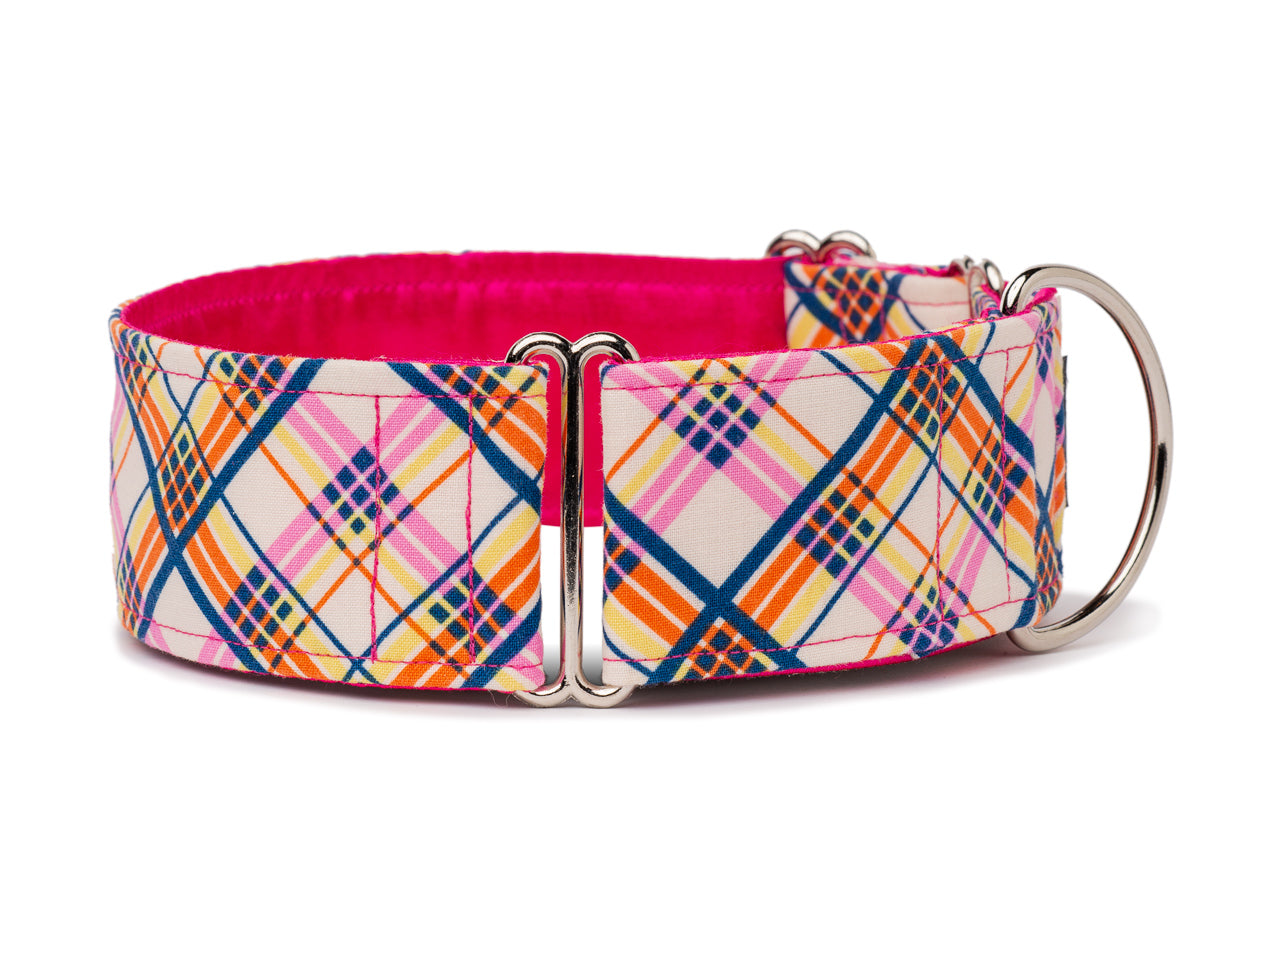 Pretty pink plaid is the perfect accessory for the stylish pooch about town!